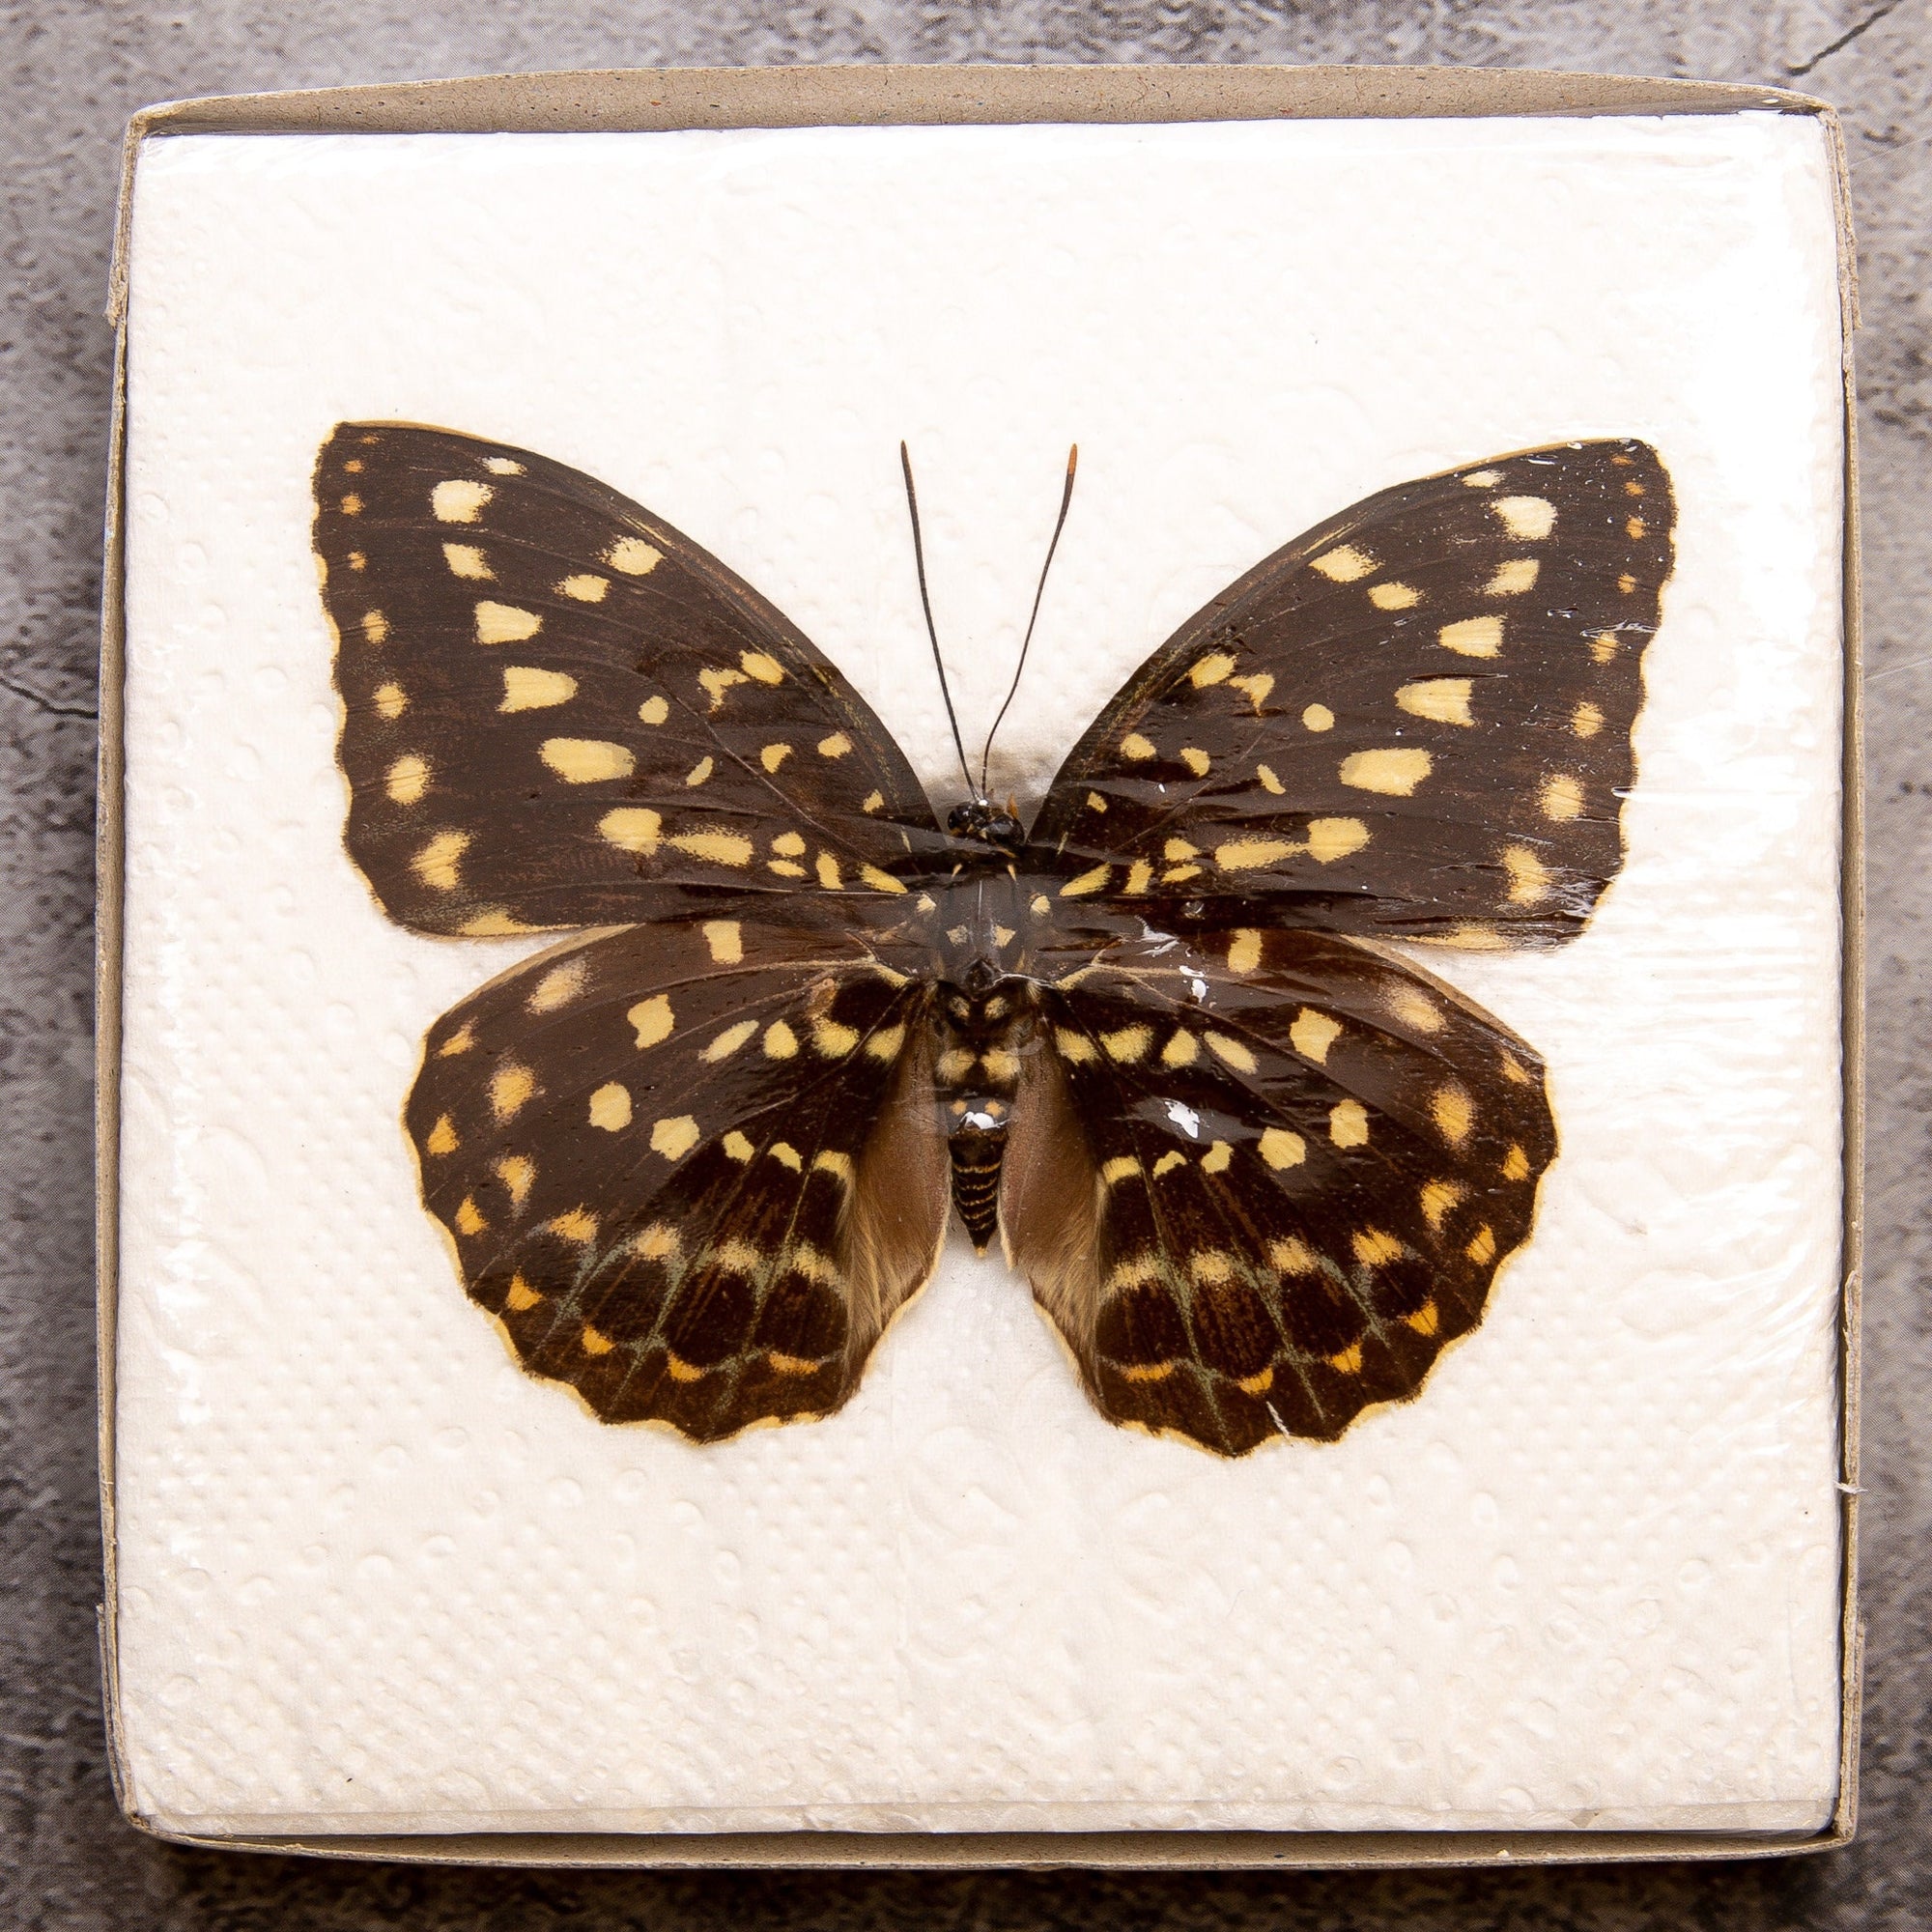 The Common Archduke, Real Dry-preserved Butterfly Spread-Specimen, Wings Open, Ethically Sourced Taxidermy